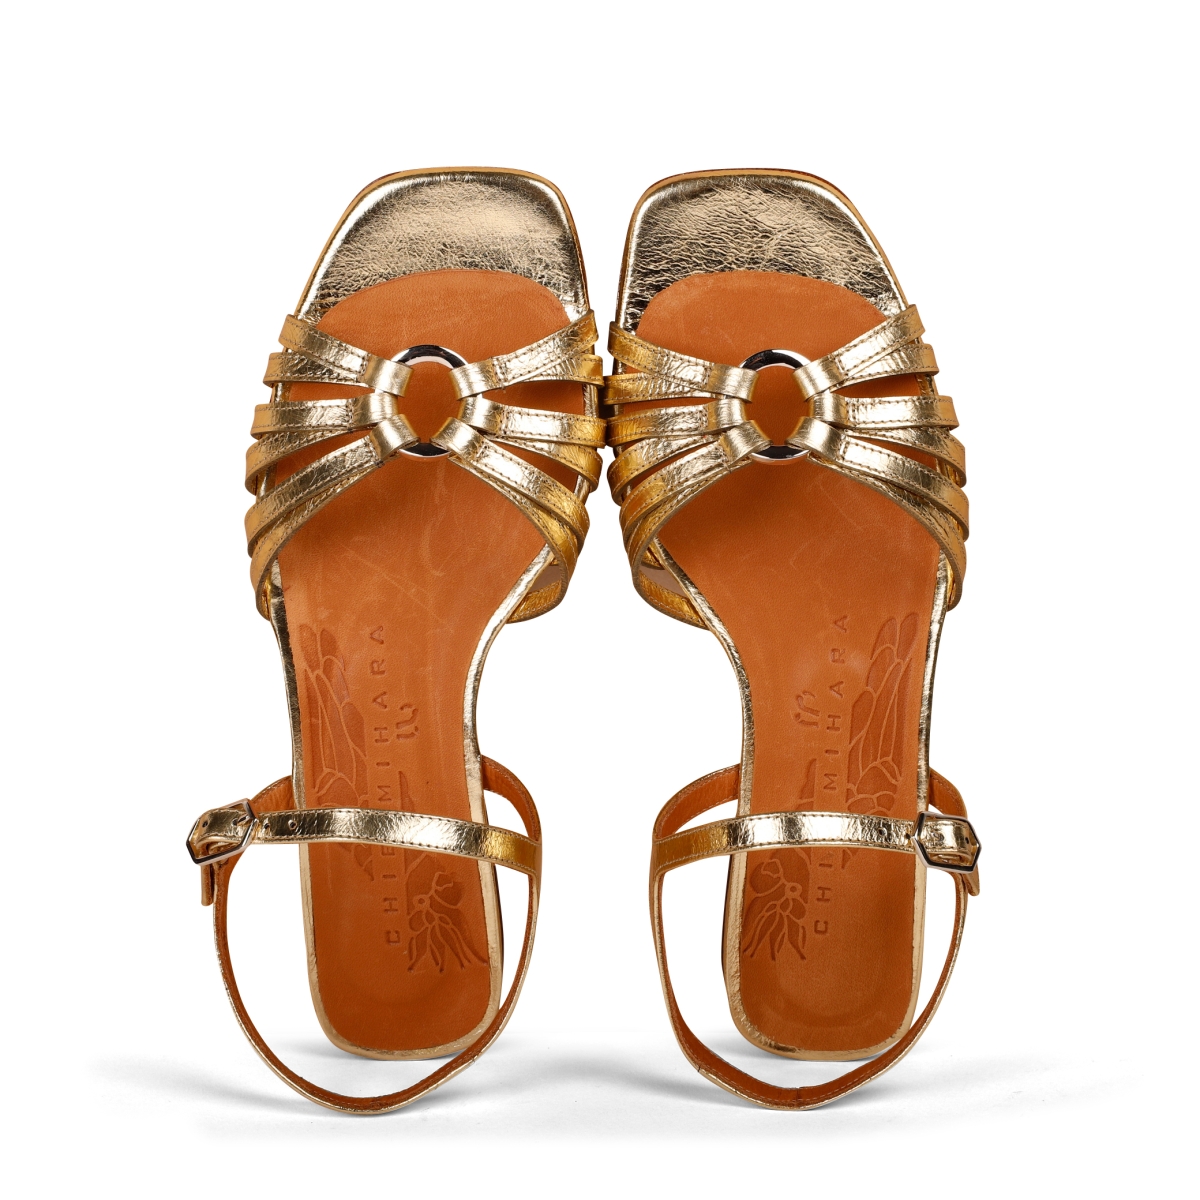 Chie Mihara flat sandals in gold metallic leather gold jewelry ...